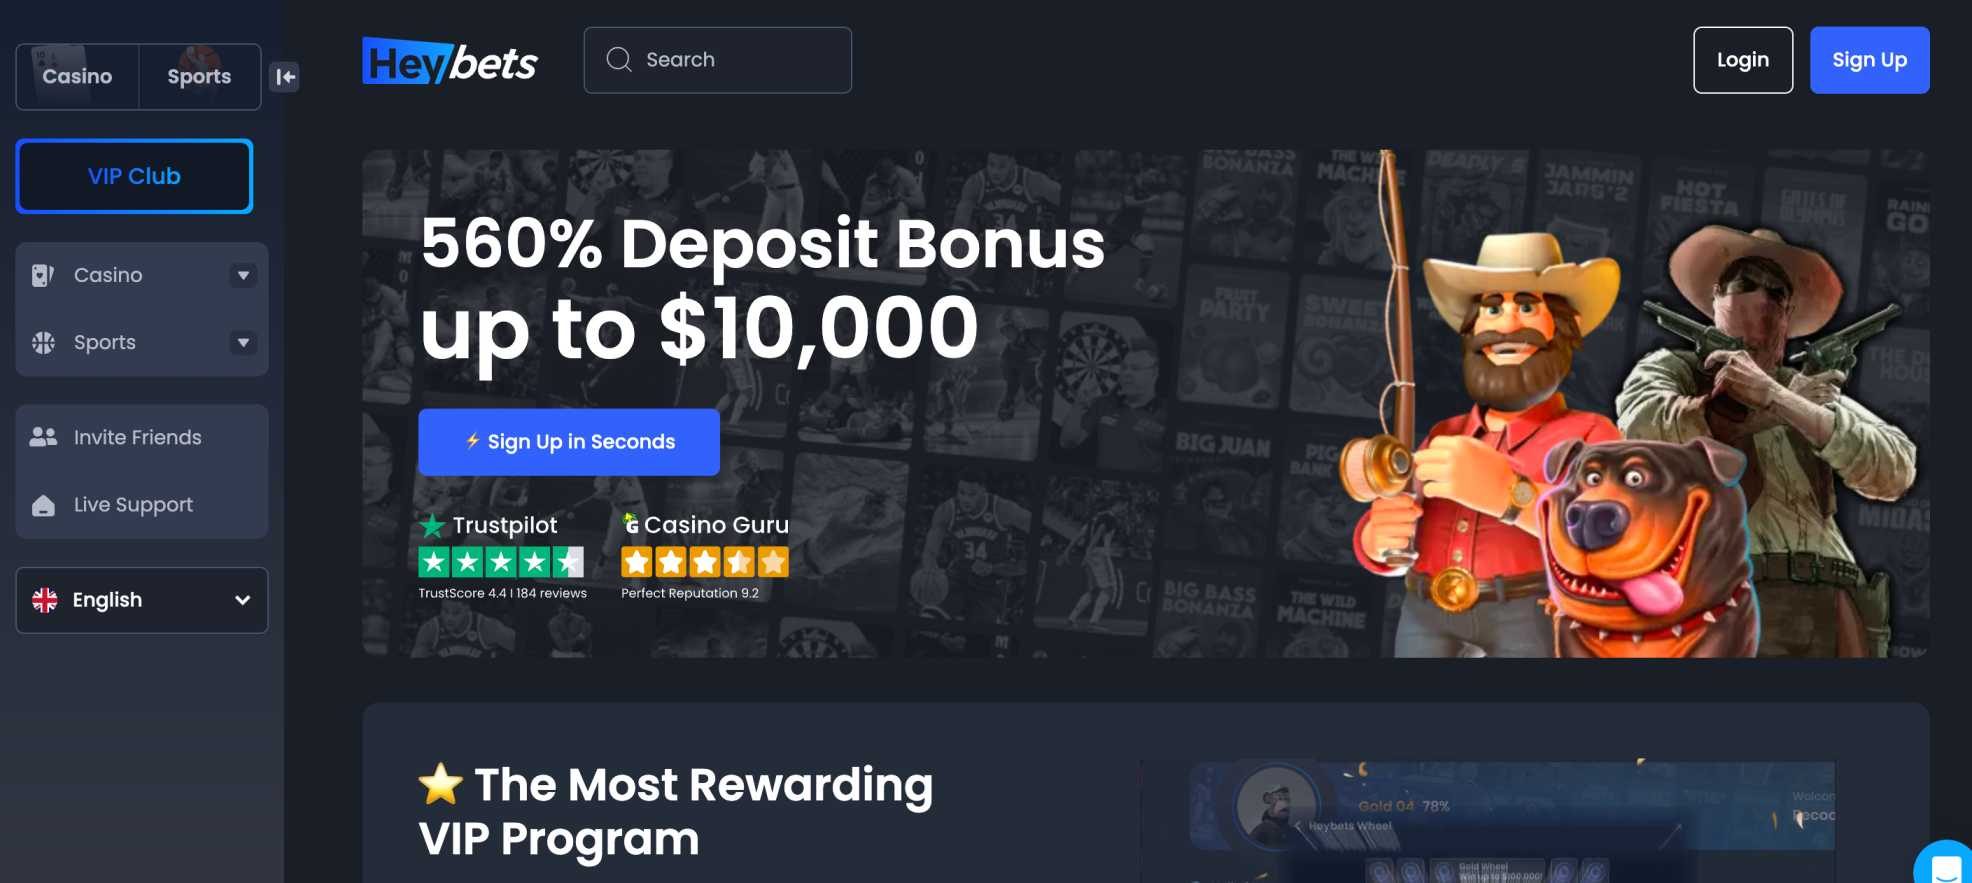 Heybets casino and sportsbook review